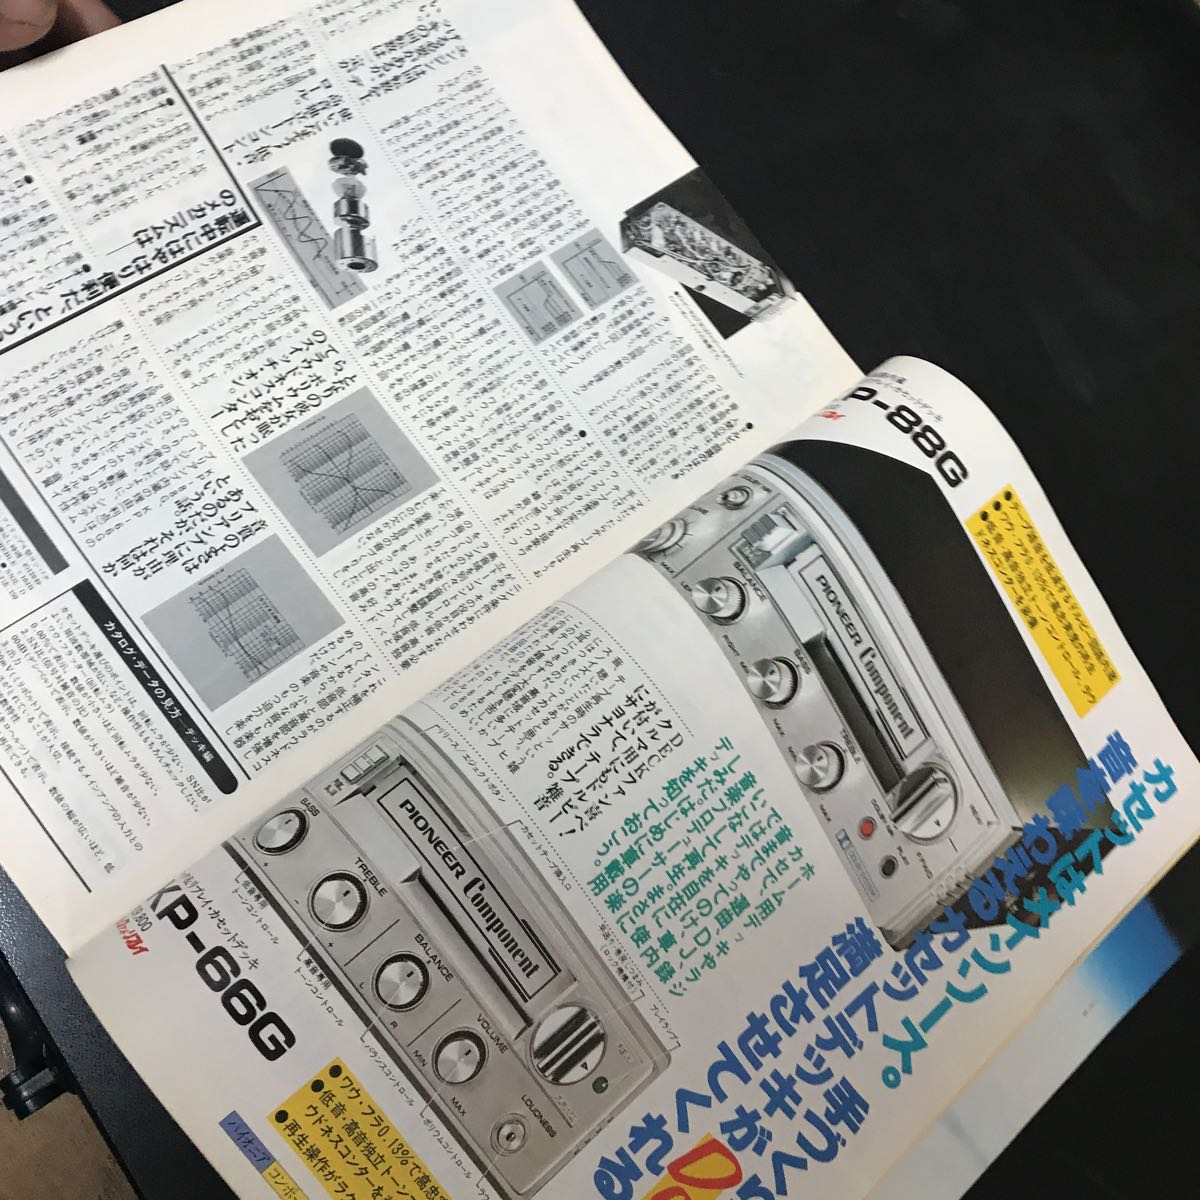 [ that time thing magazine catalog ]HiFiWay PIONEER car stereo all catalog 1978 year 8 month old car car component stereo 